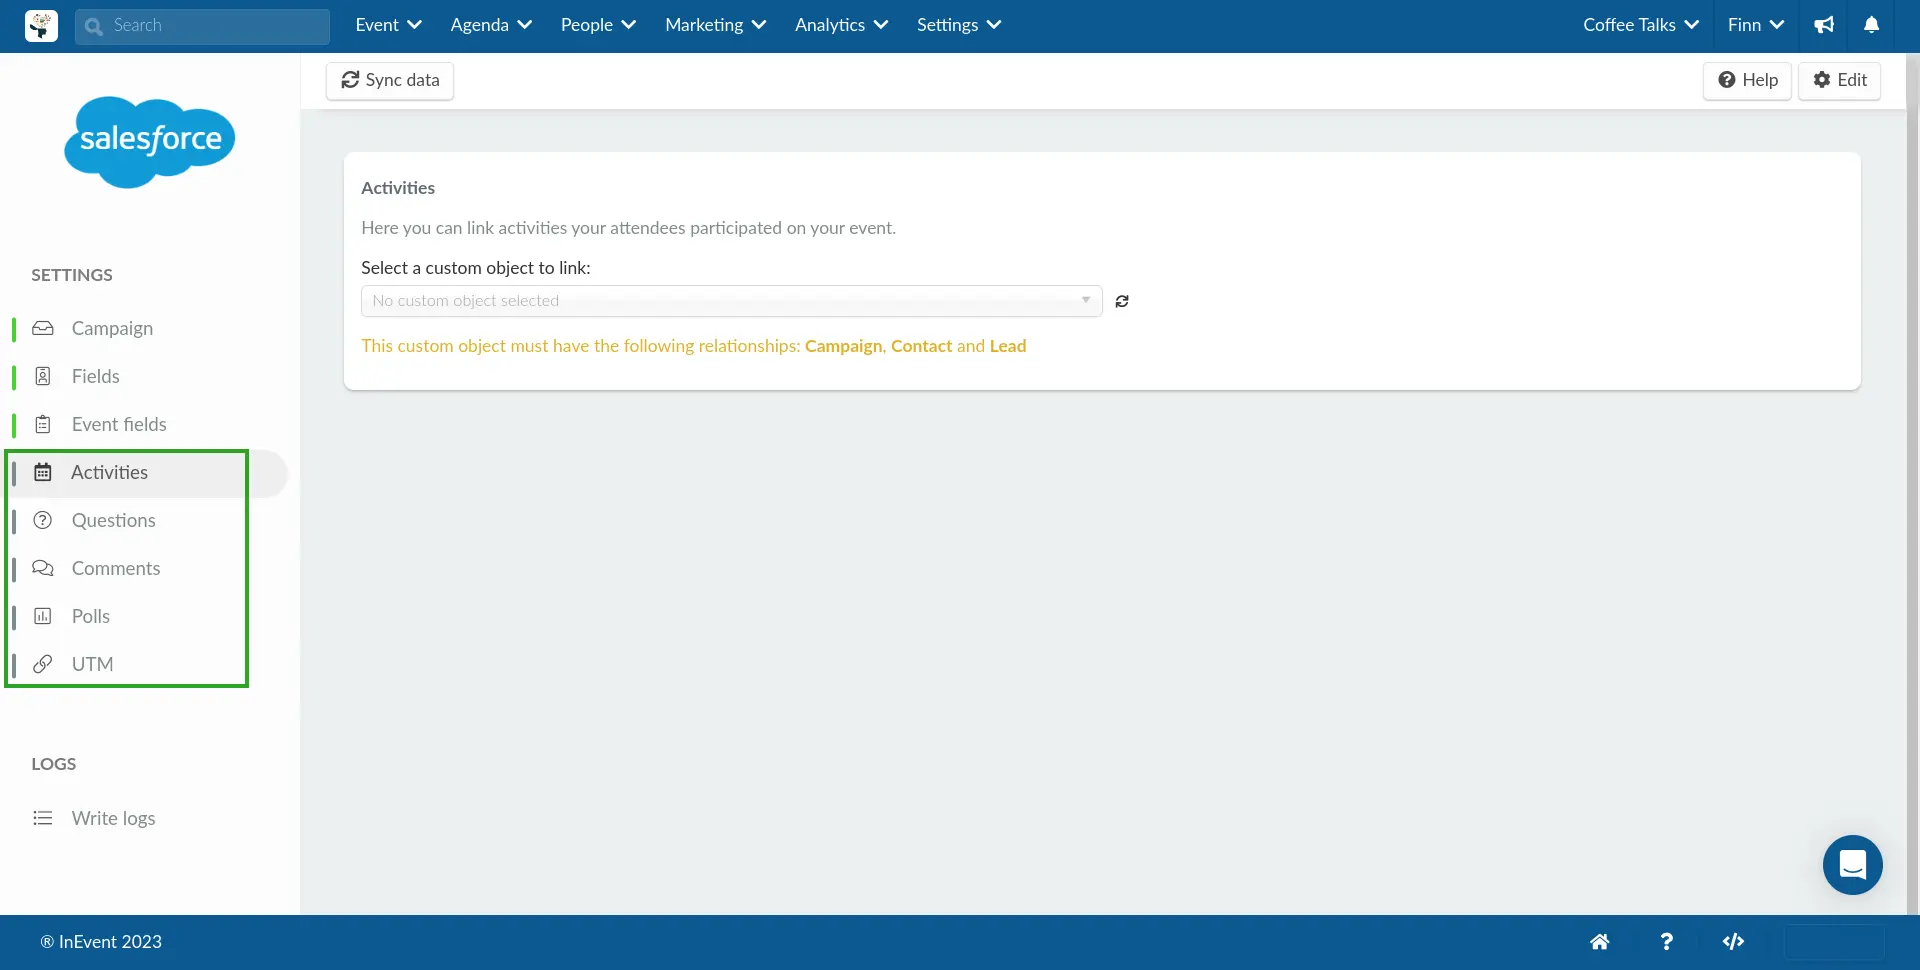 Screenshot showing the Activities, Questions, Comments, Polls, and UTM sections in the Salesforce integration interface.